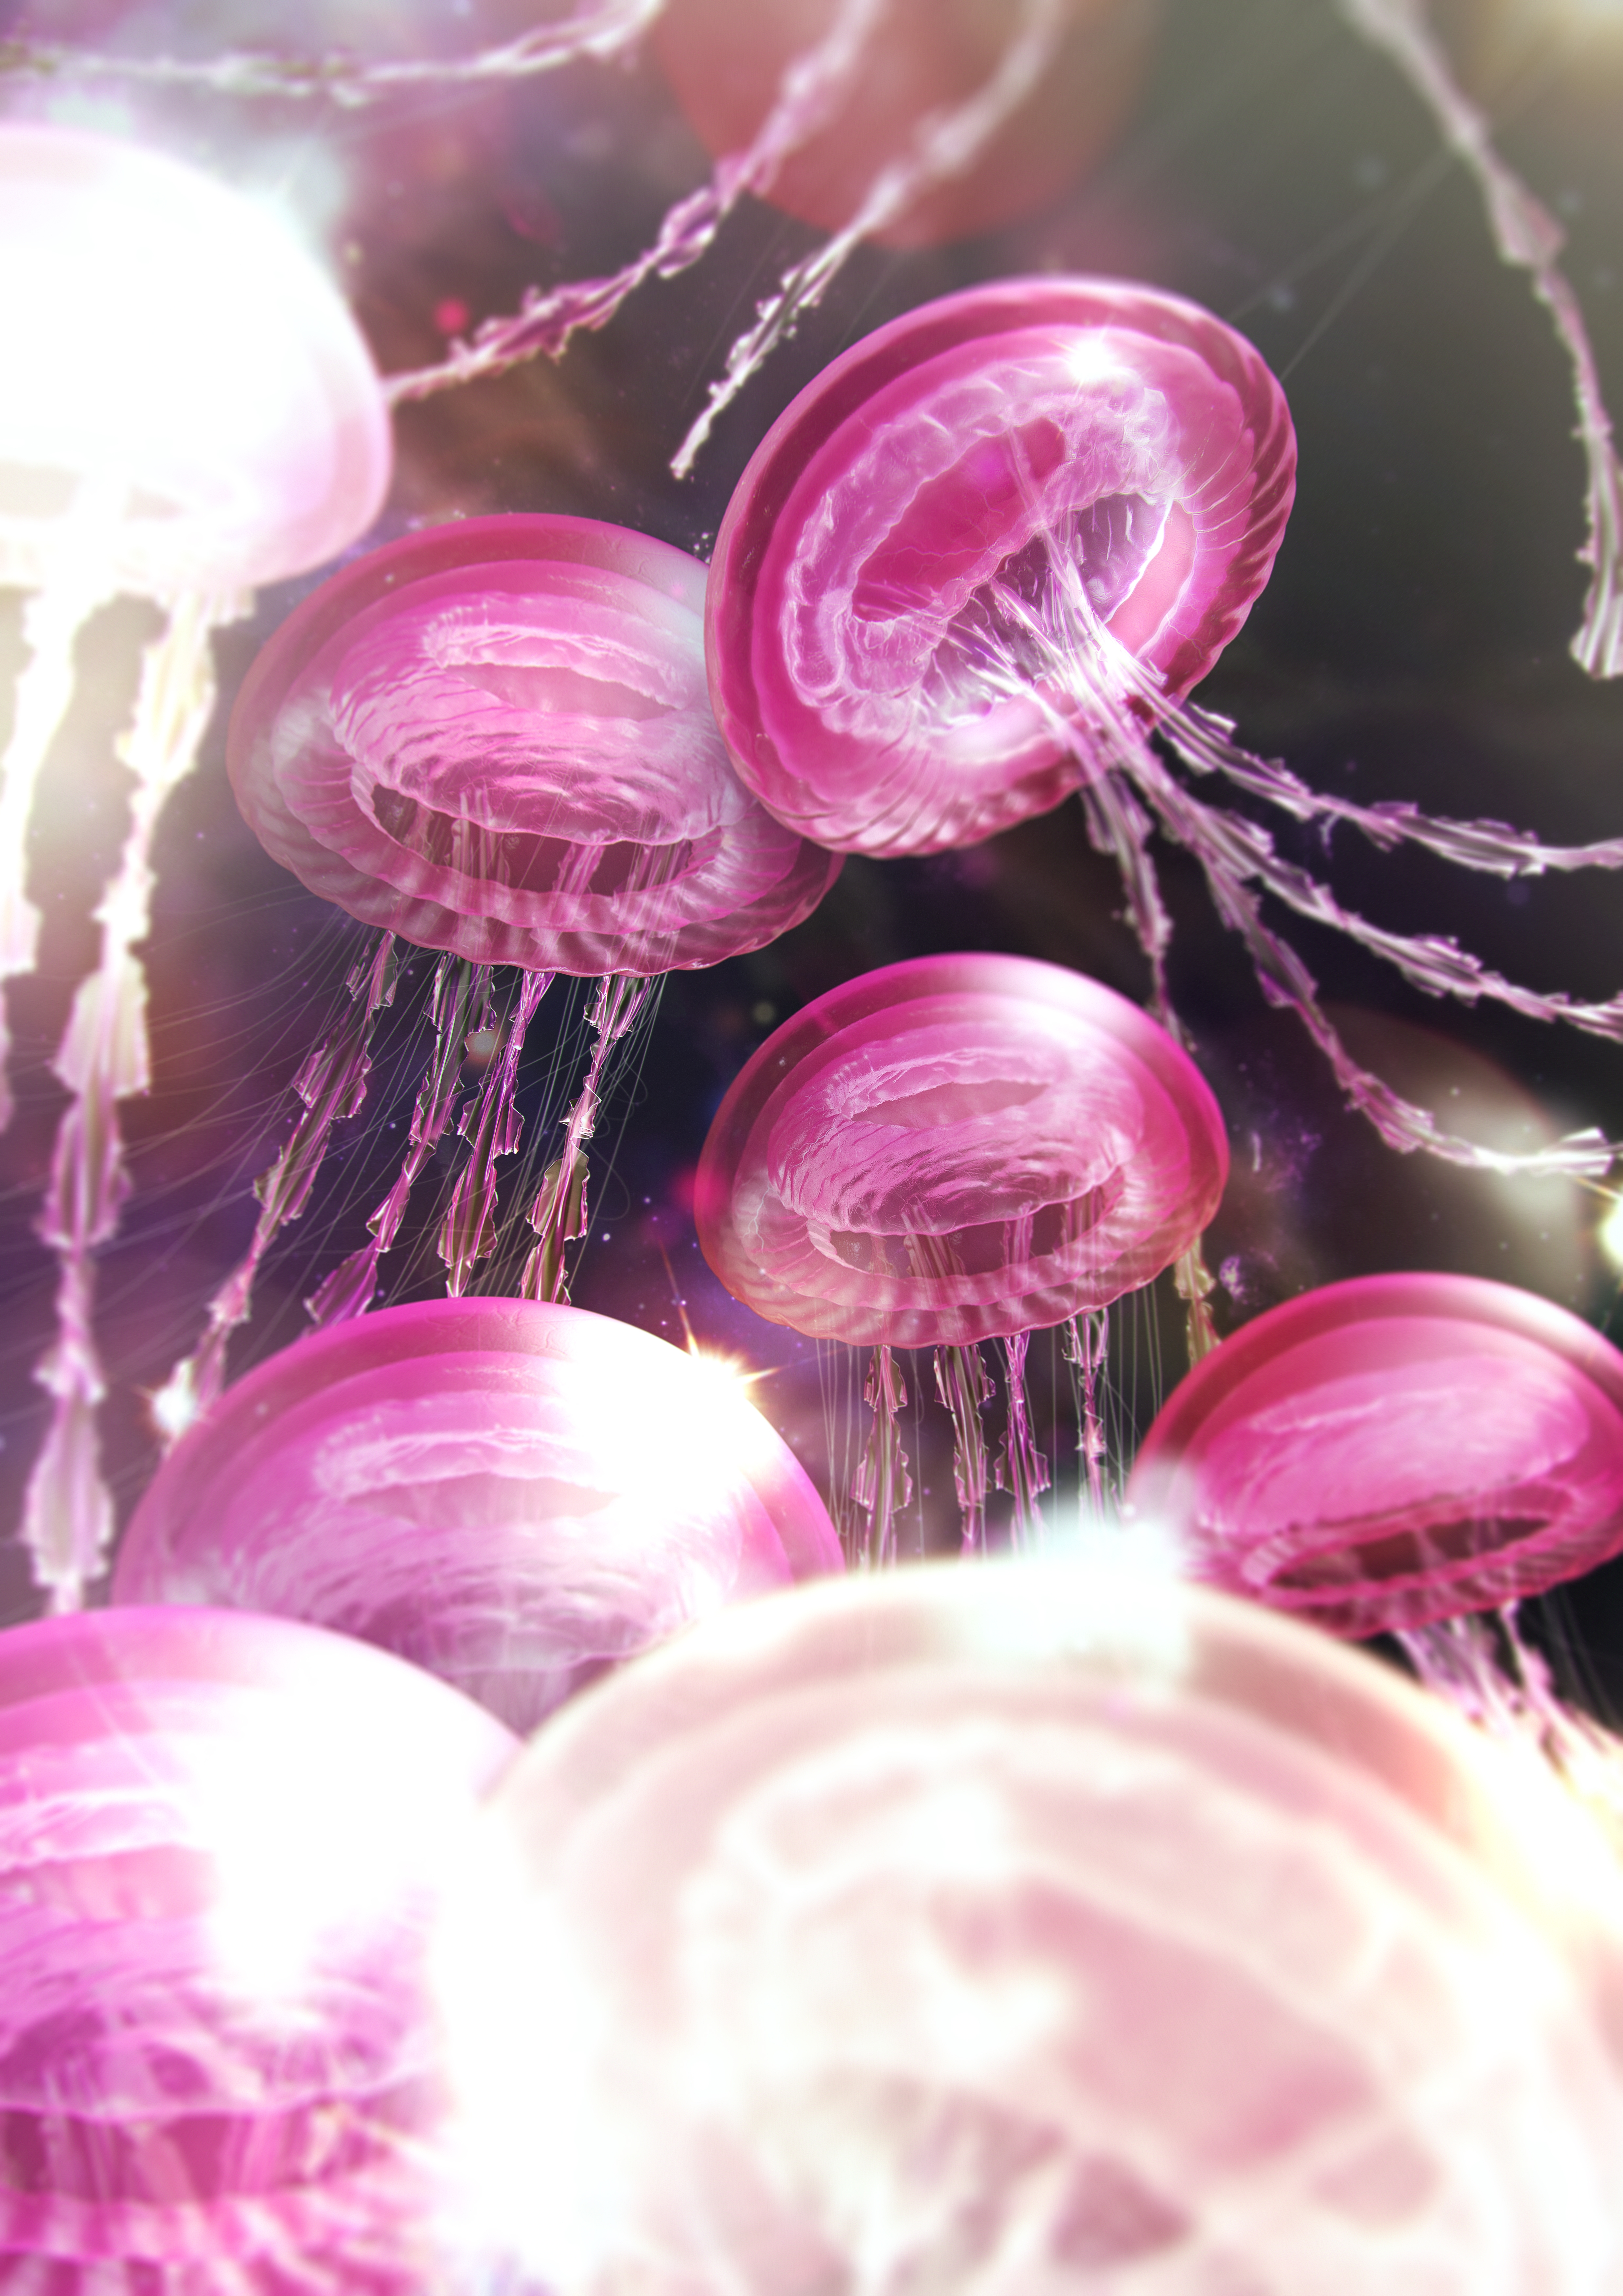 HD wallpaper, 5K, Pink Aesthetic, Surreal, Jellyfishes